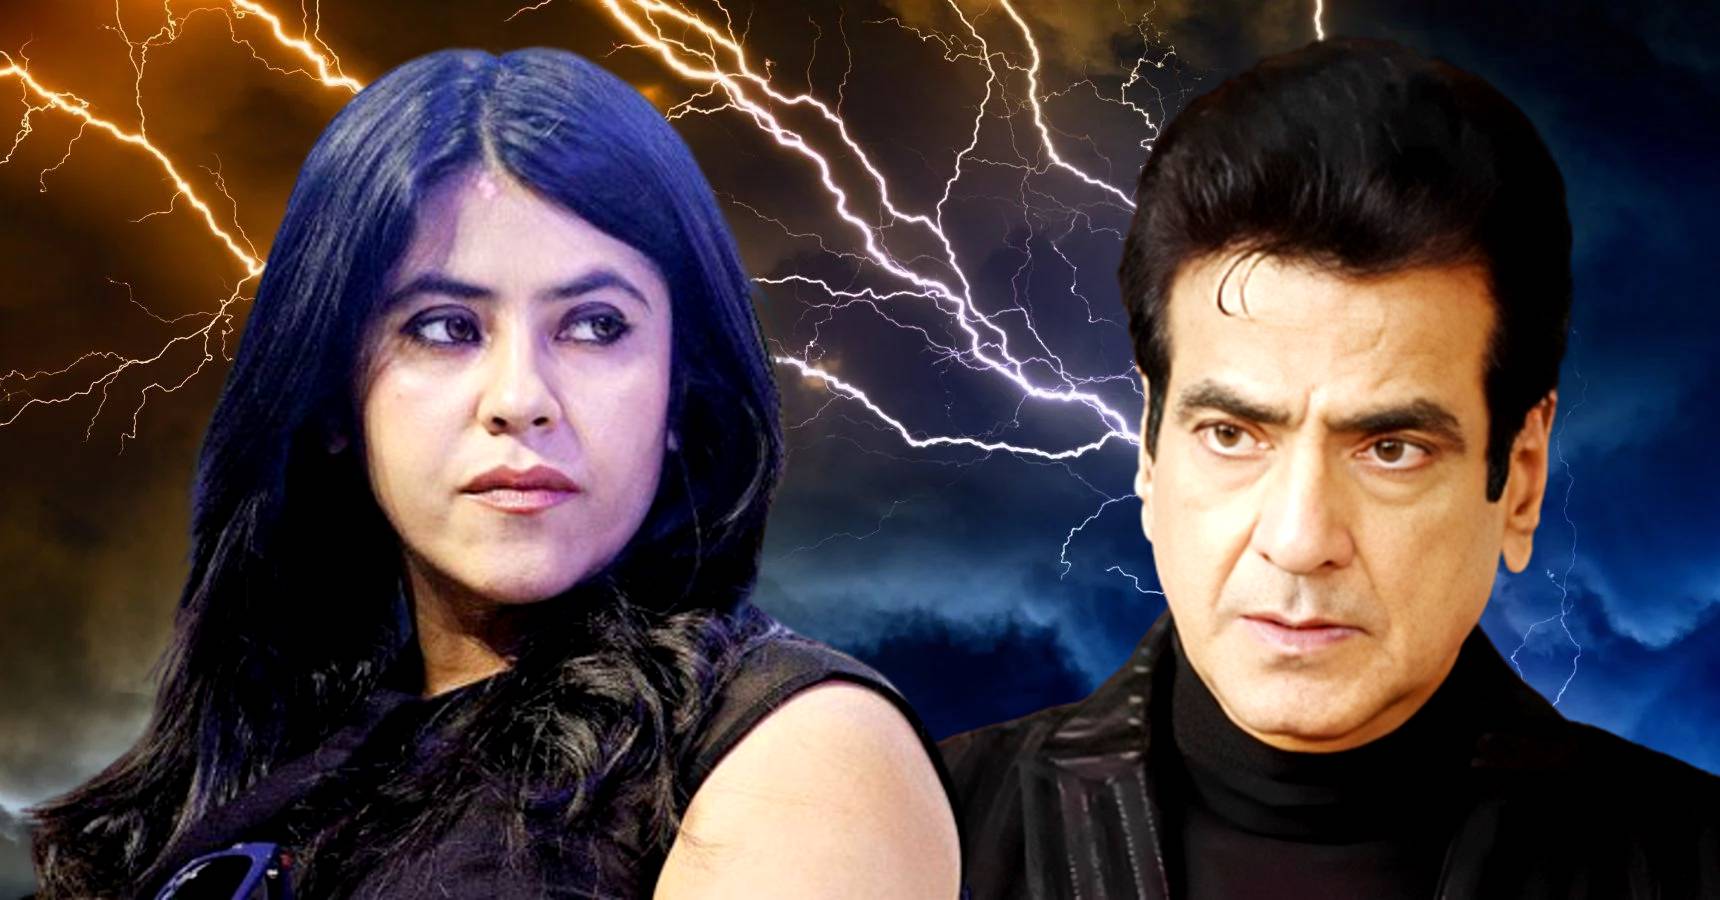 Ekta Kapoor revealed she is still unmarried because of her father Jeetendra